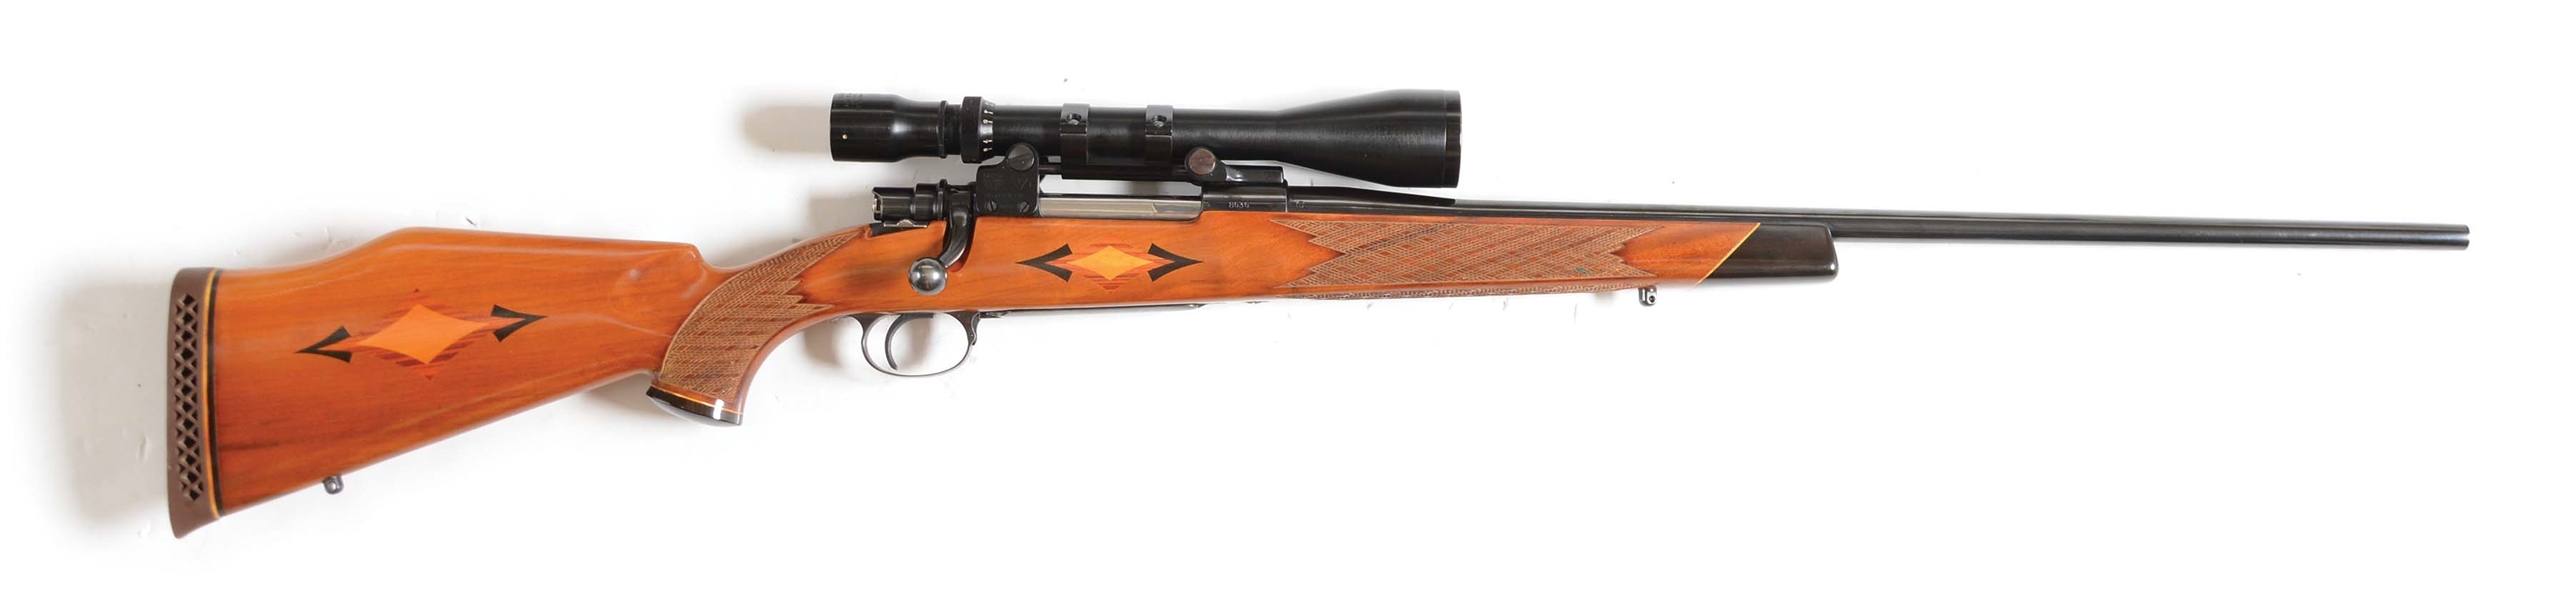 (M) PRIME 1957 PRODUCTION WEATHERBY CUSTOM IN .300 WEATHERBY MAGNUM..